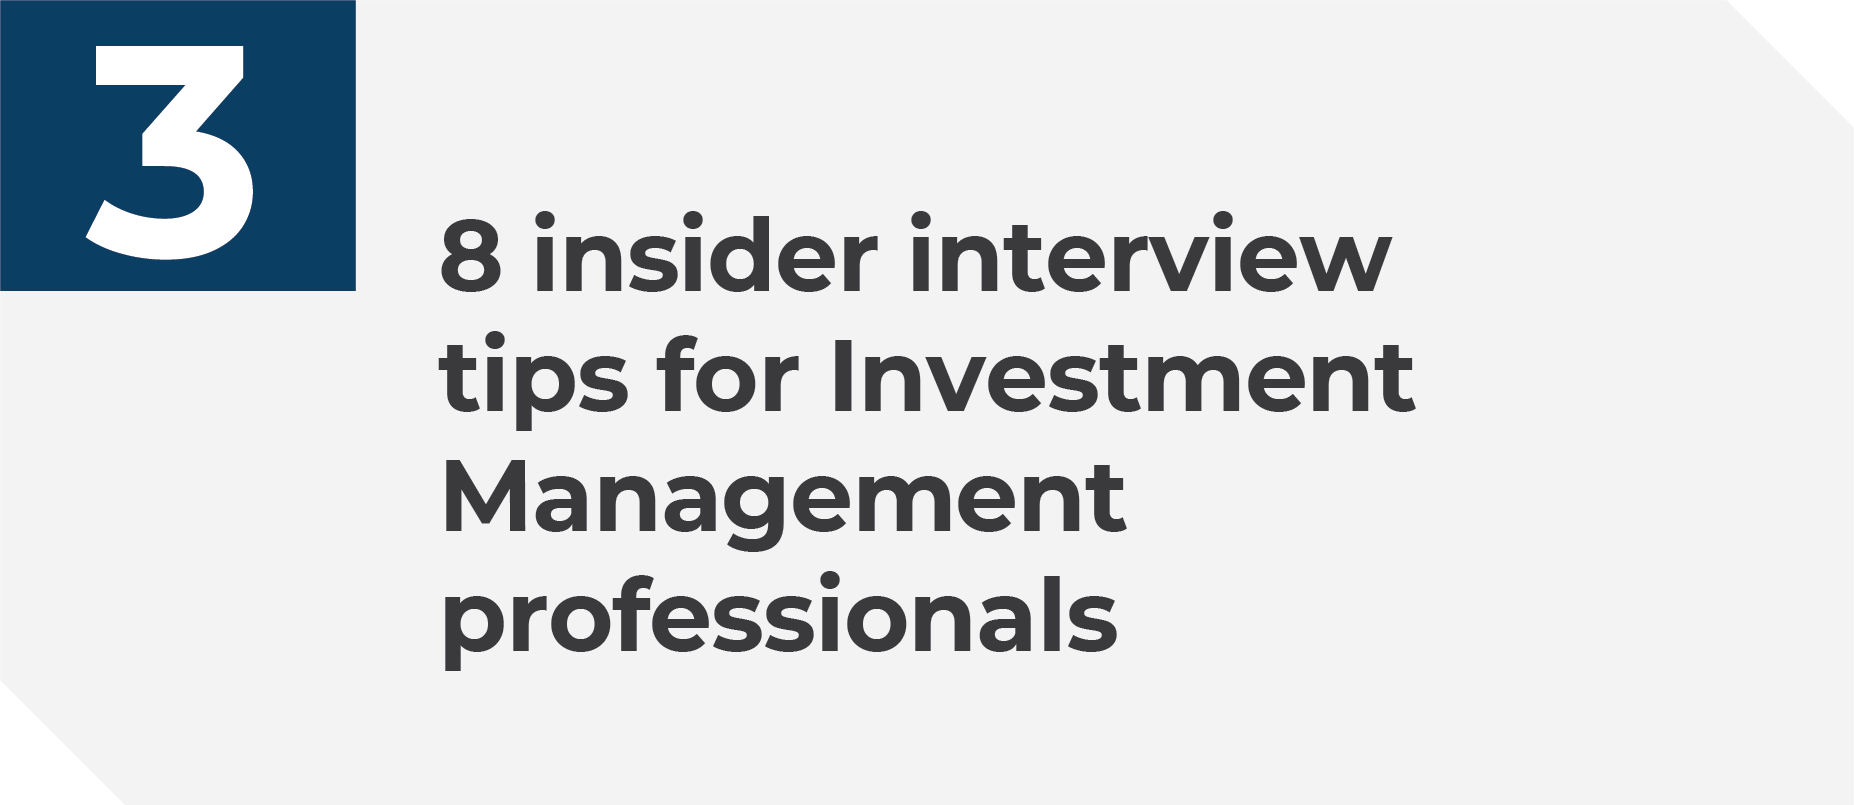 8 insider interview tips for Investment Management professionals